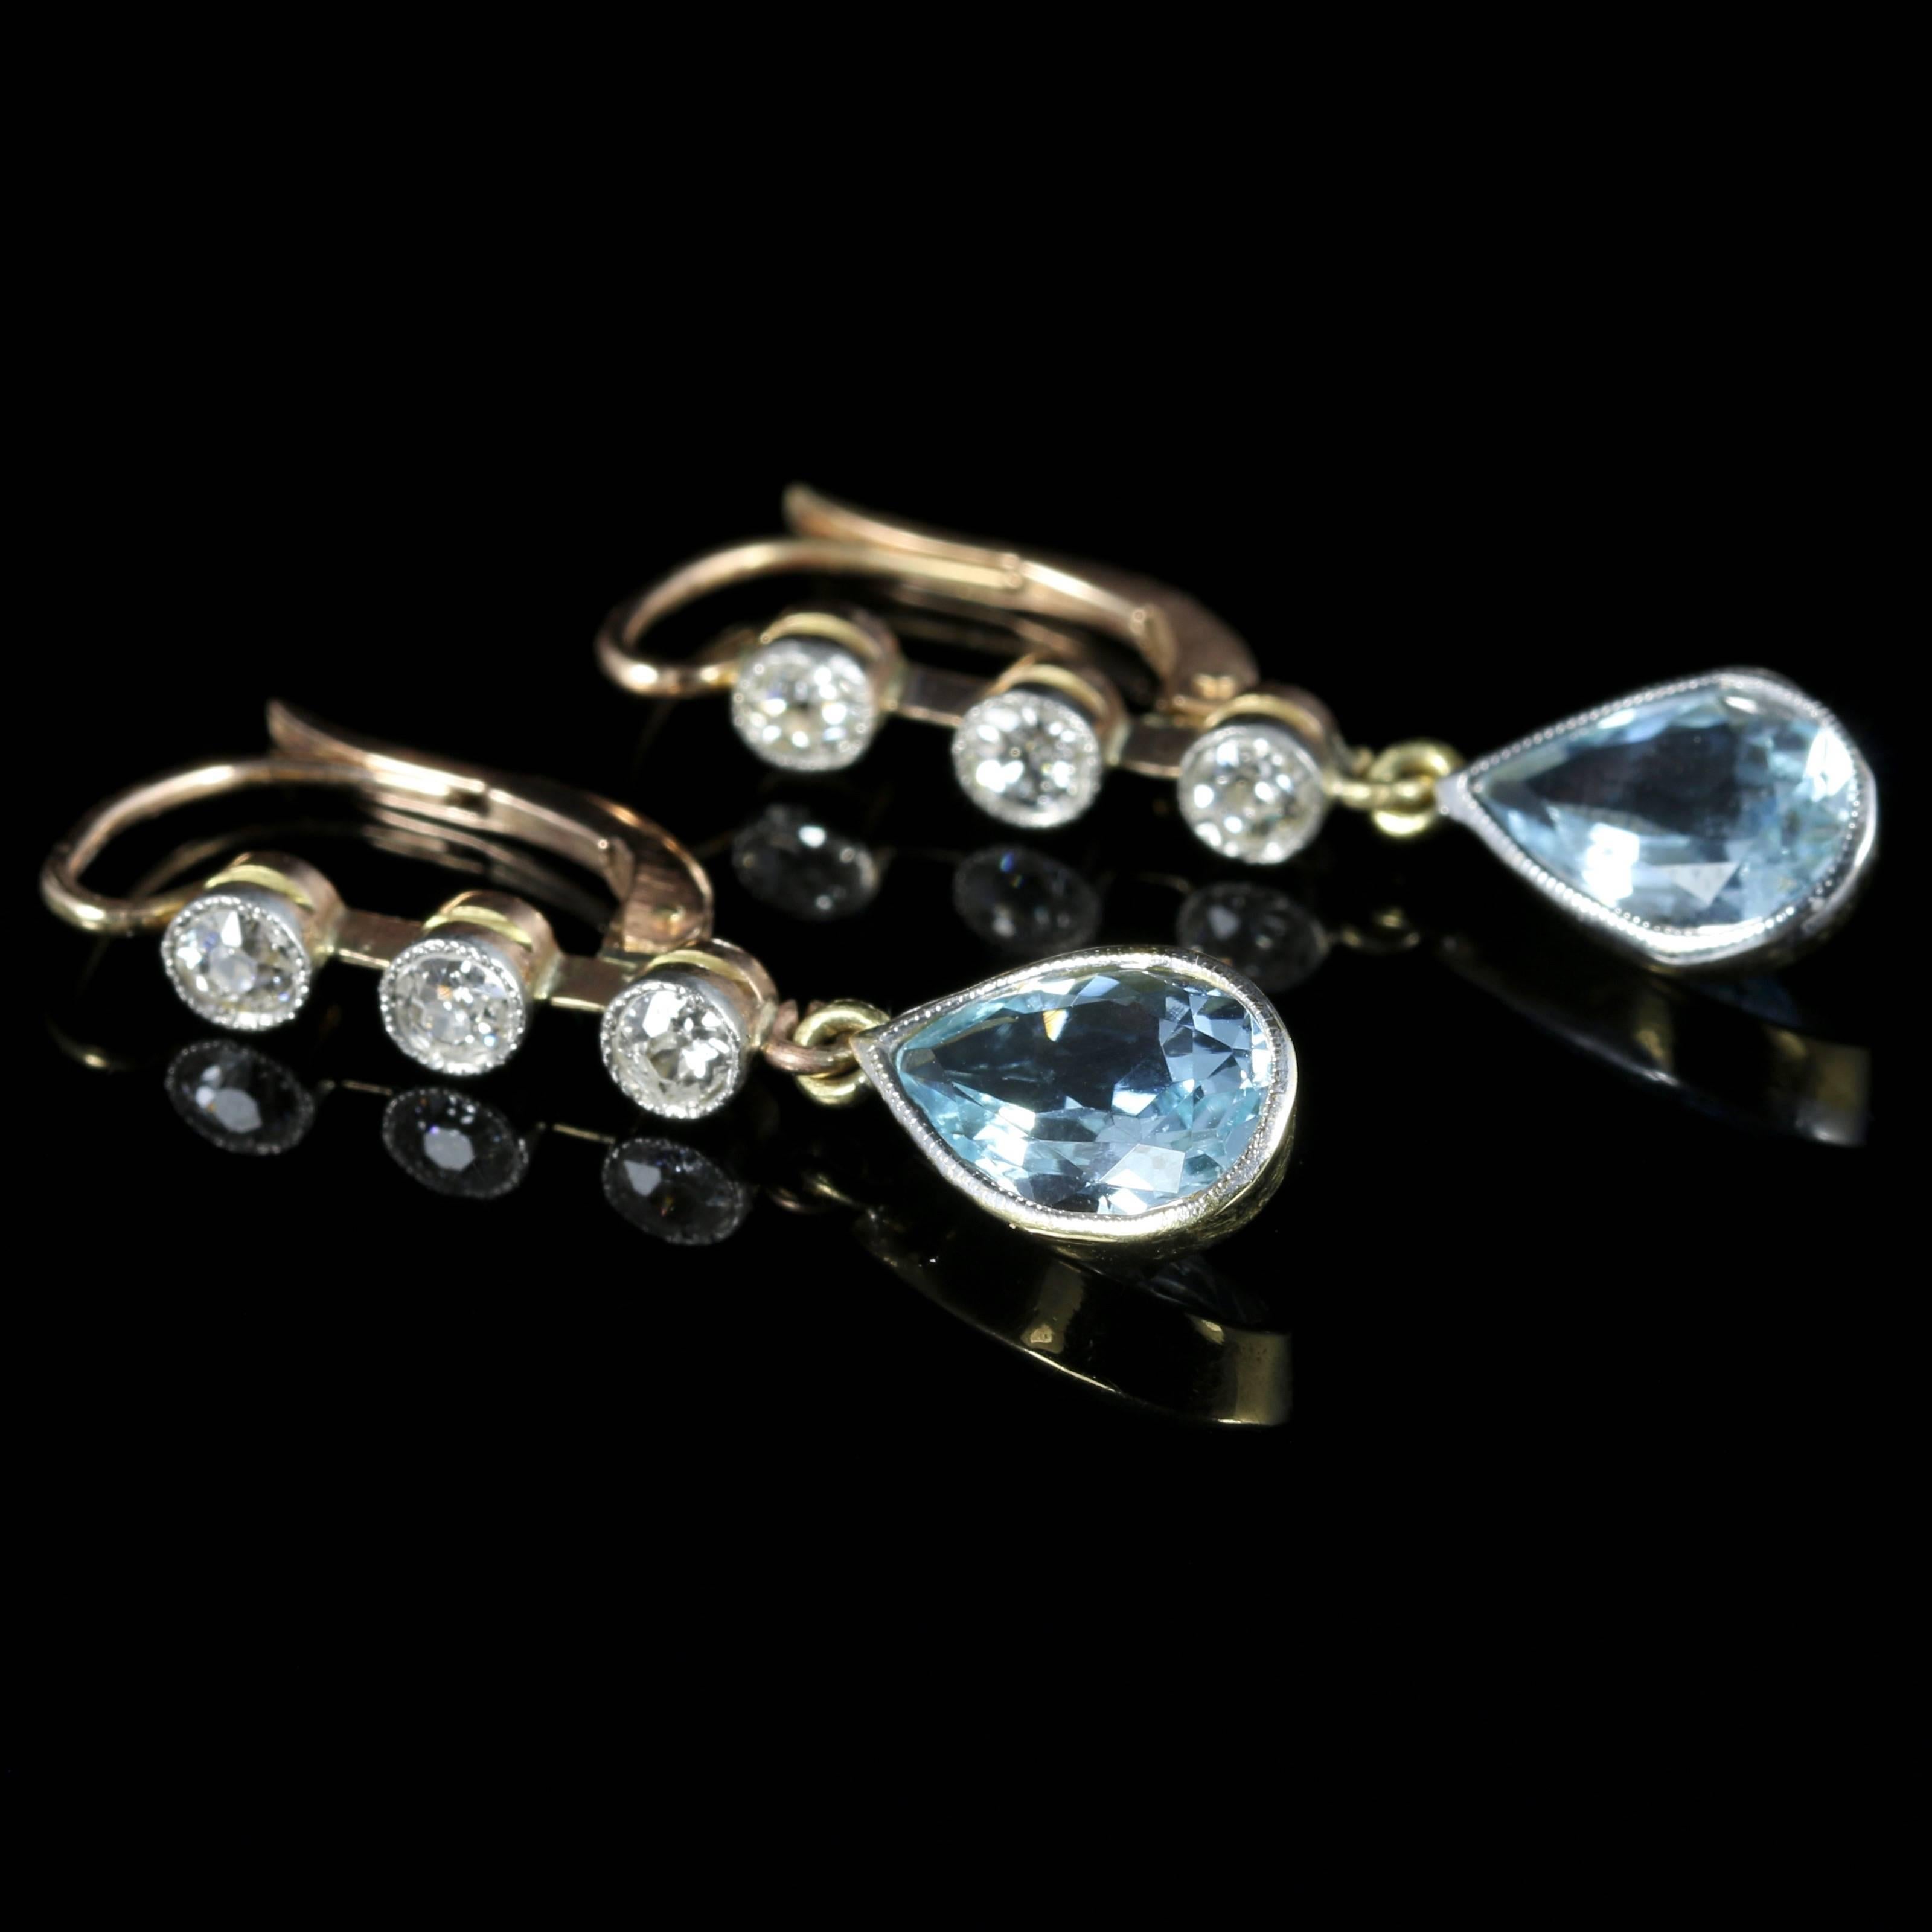 For more details please click continue reading down below...

These fabulous genuine antique Aquamarine and Diamond earrings are Circa 1900.

Set in 18ct Yellow Gold.

Adorned with a trilogy of Diamonds which are milligrain set and lead down to a